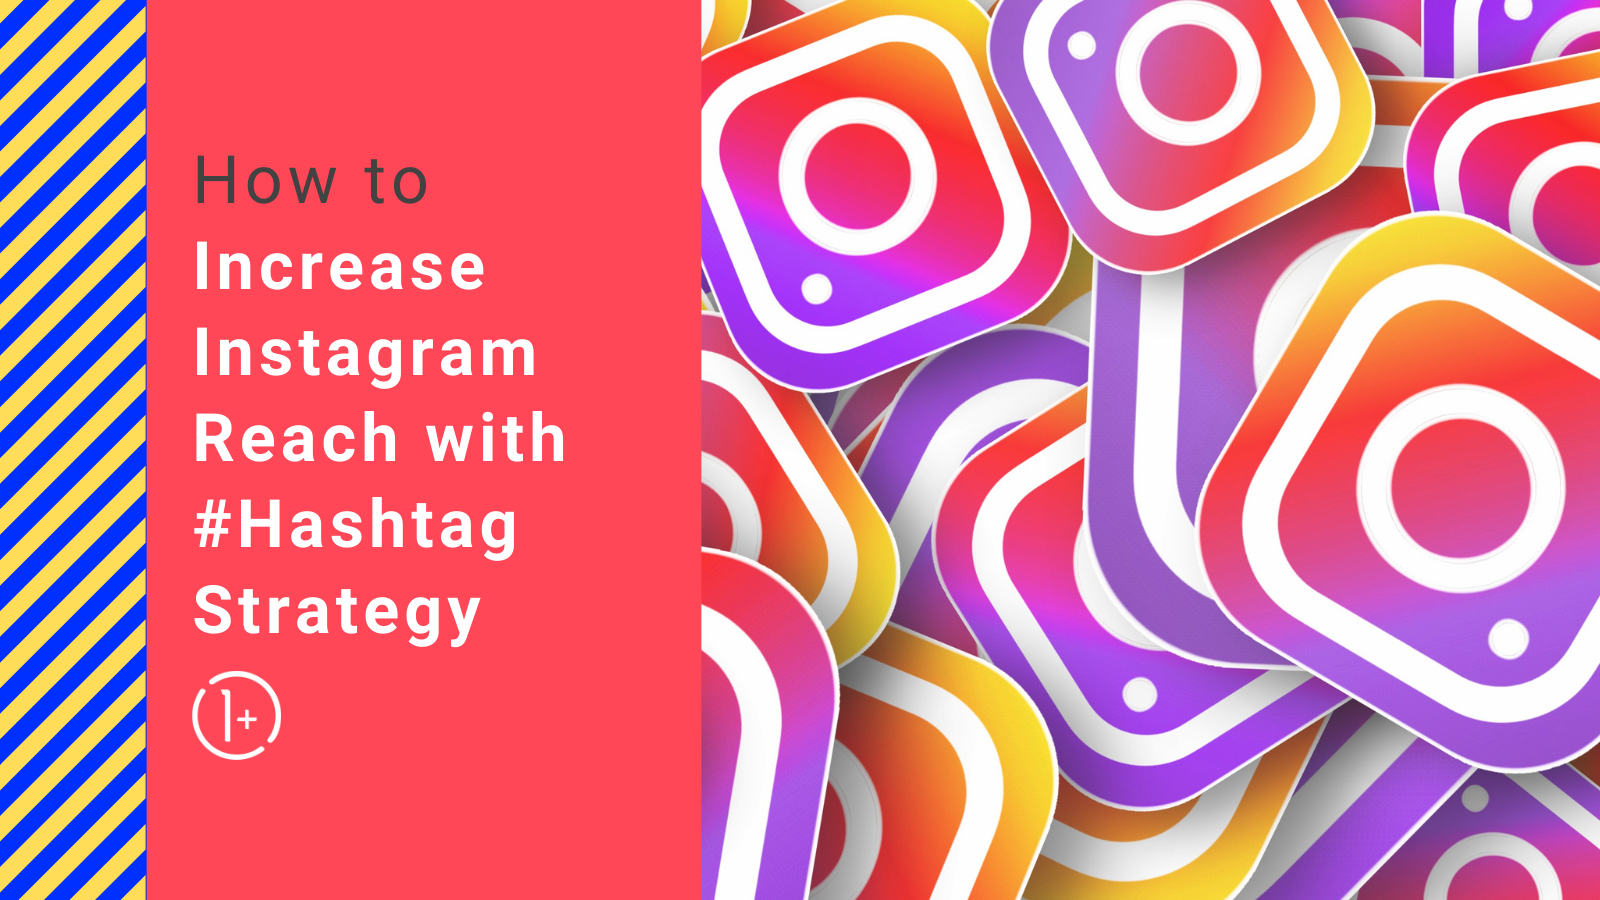 How to Increase Instagram Reach with Hashtag Strategy - 1 Plus Events